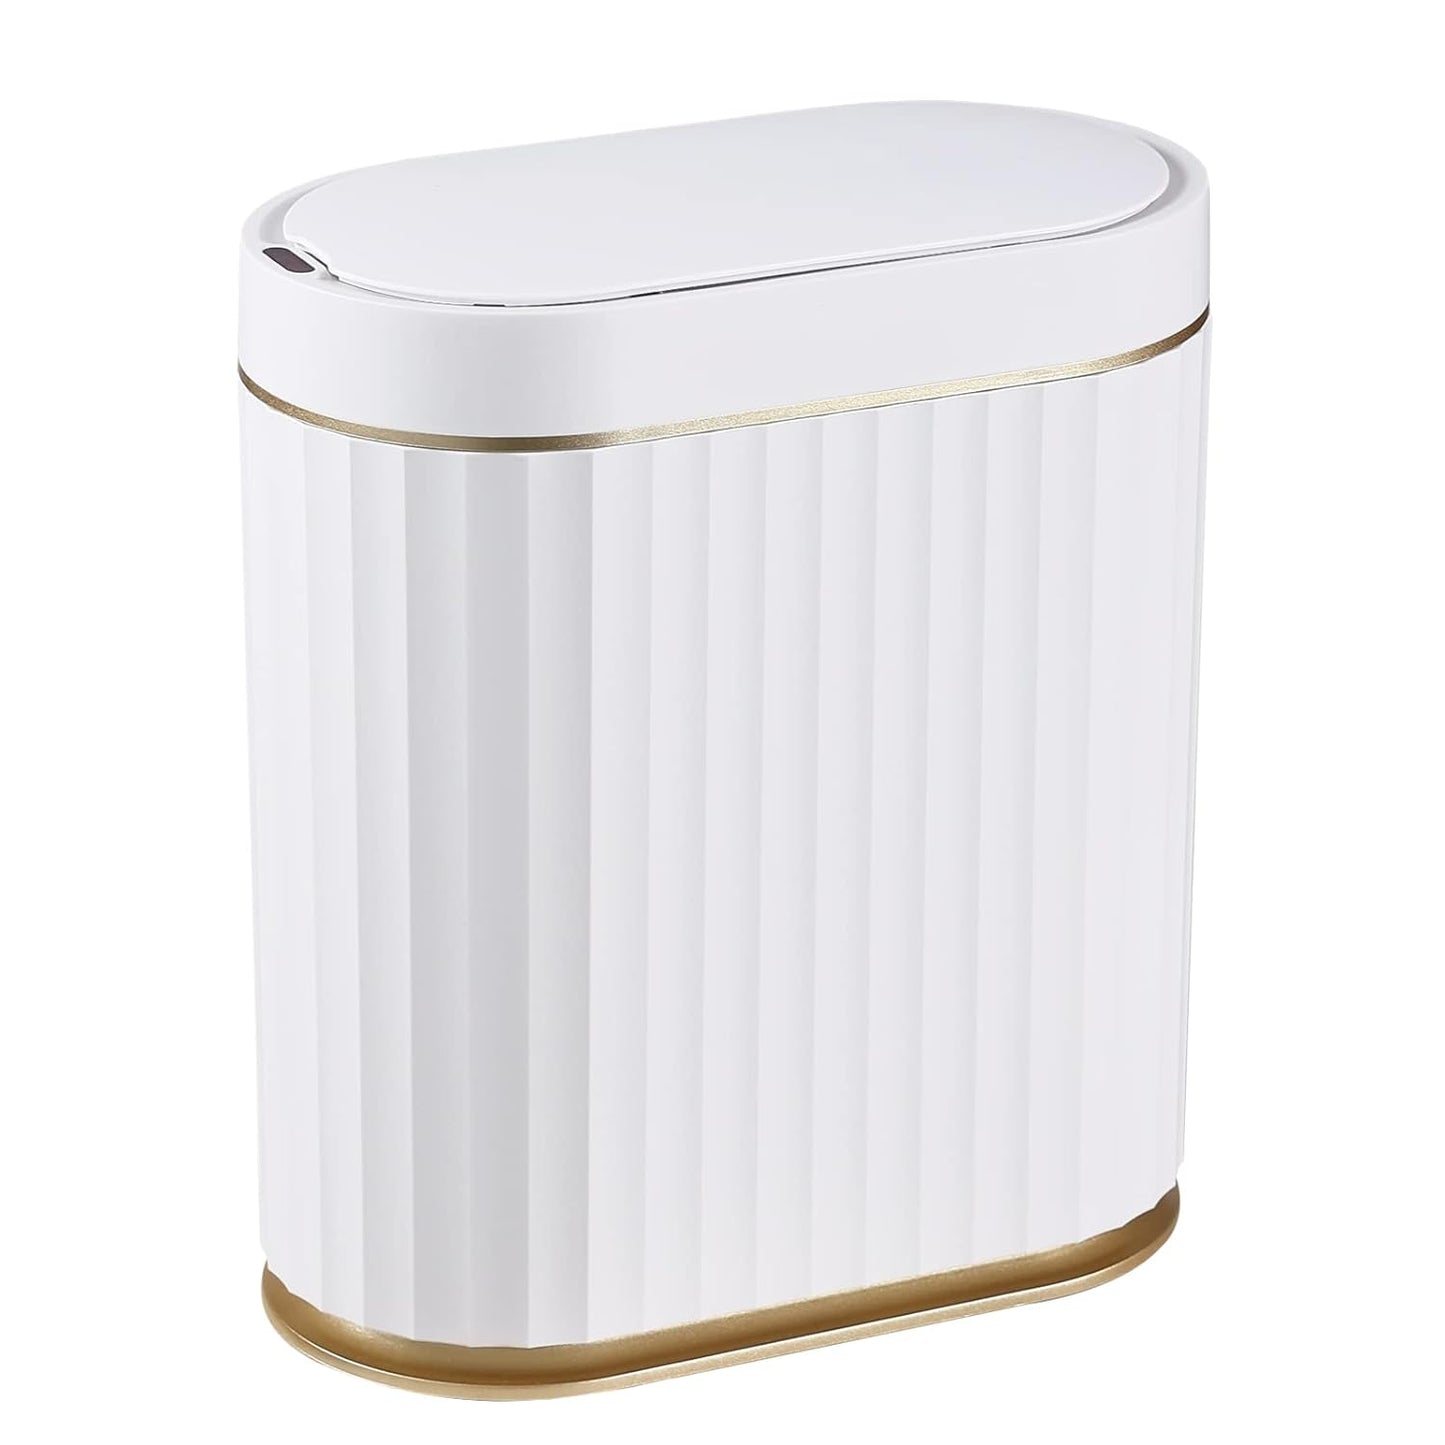 Bathroom Trash Can with Lid Waterproof Automatic Trash Can, 2 Gallon Slimline Smart Trash Can, 9 L Narrow Motion Sensor Trash Can for Bedroom, Bathroom, Kitchen, Office, White with Gold Trim